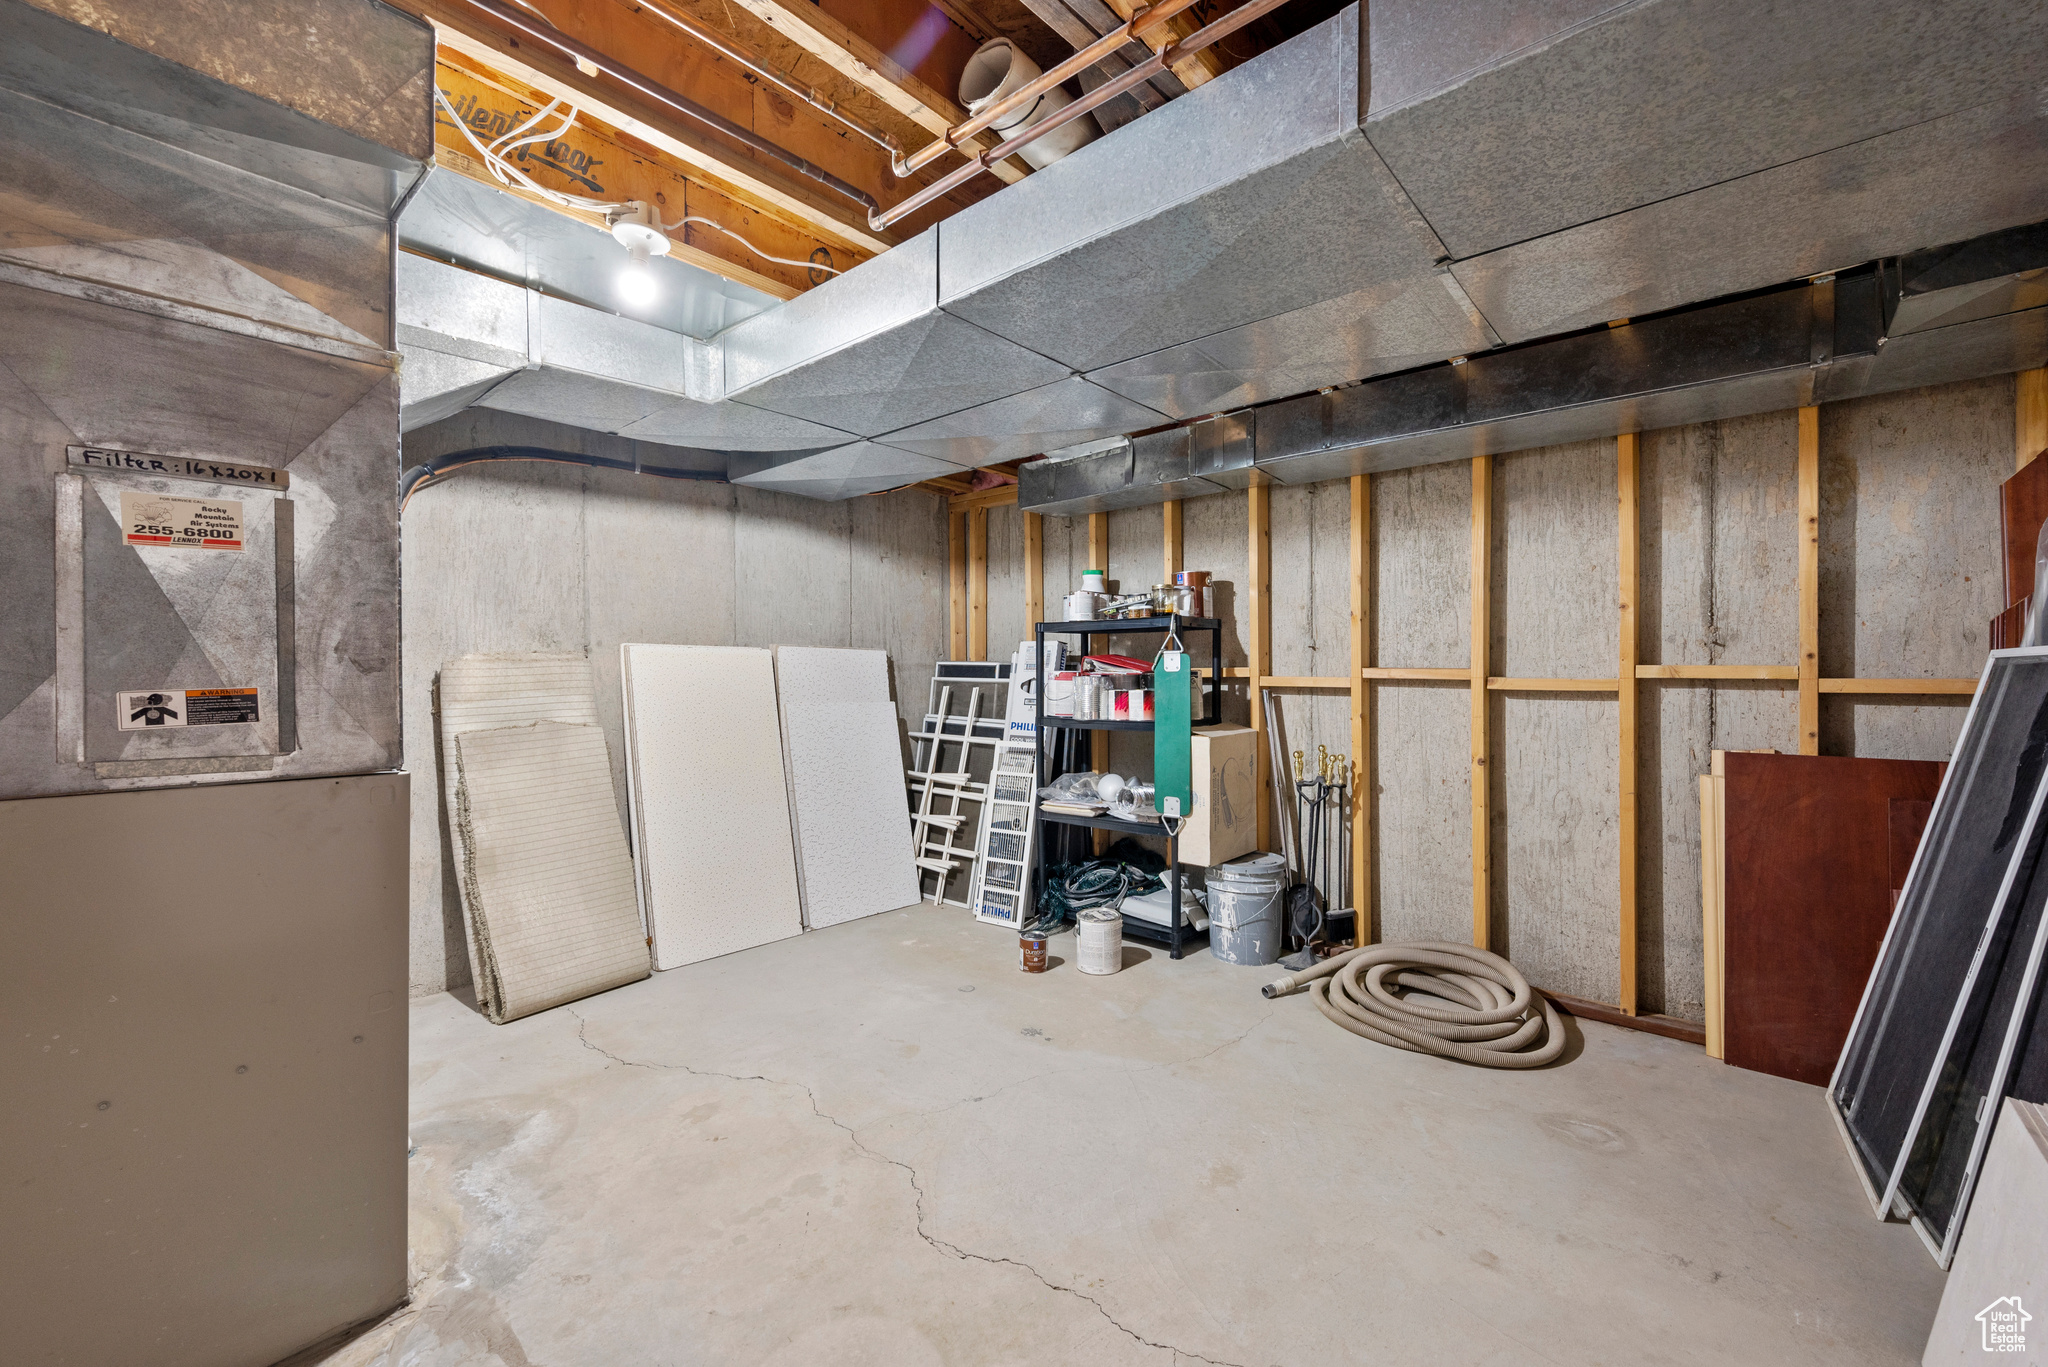 View of basement Utility room